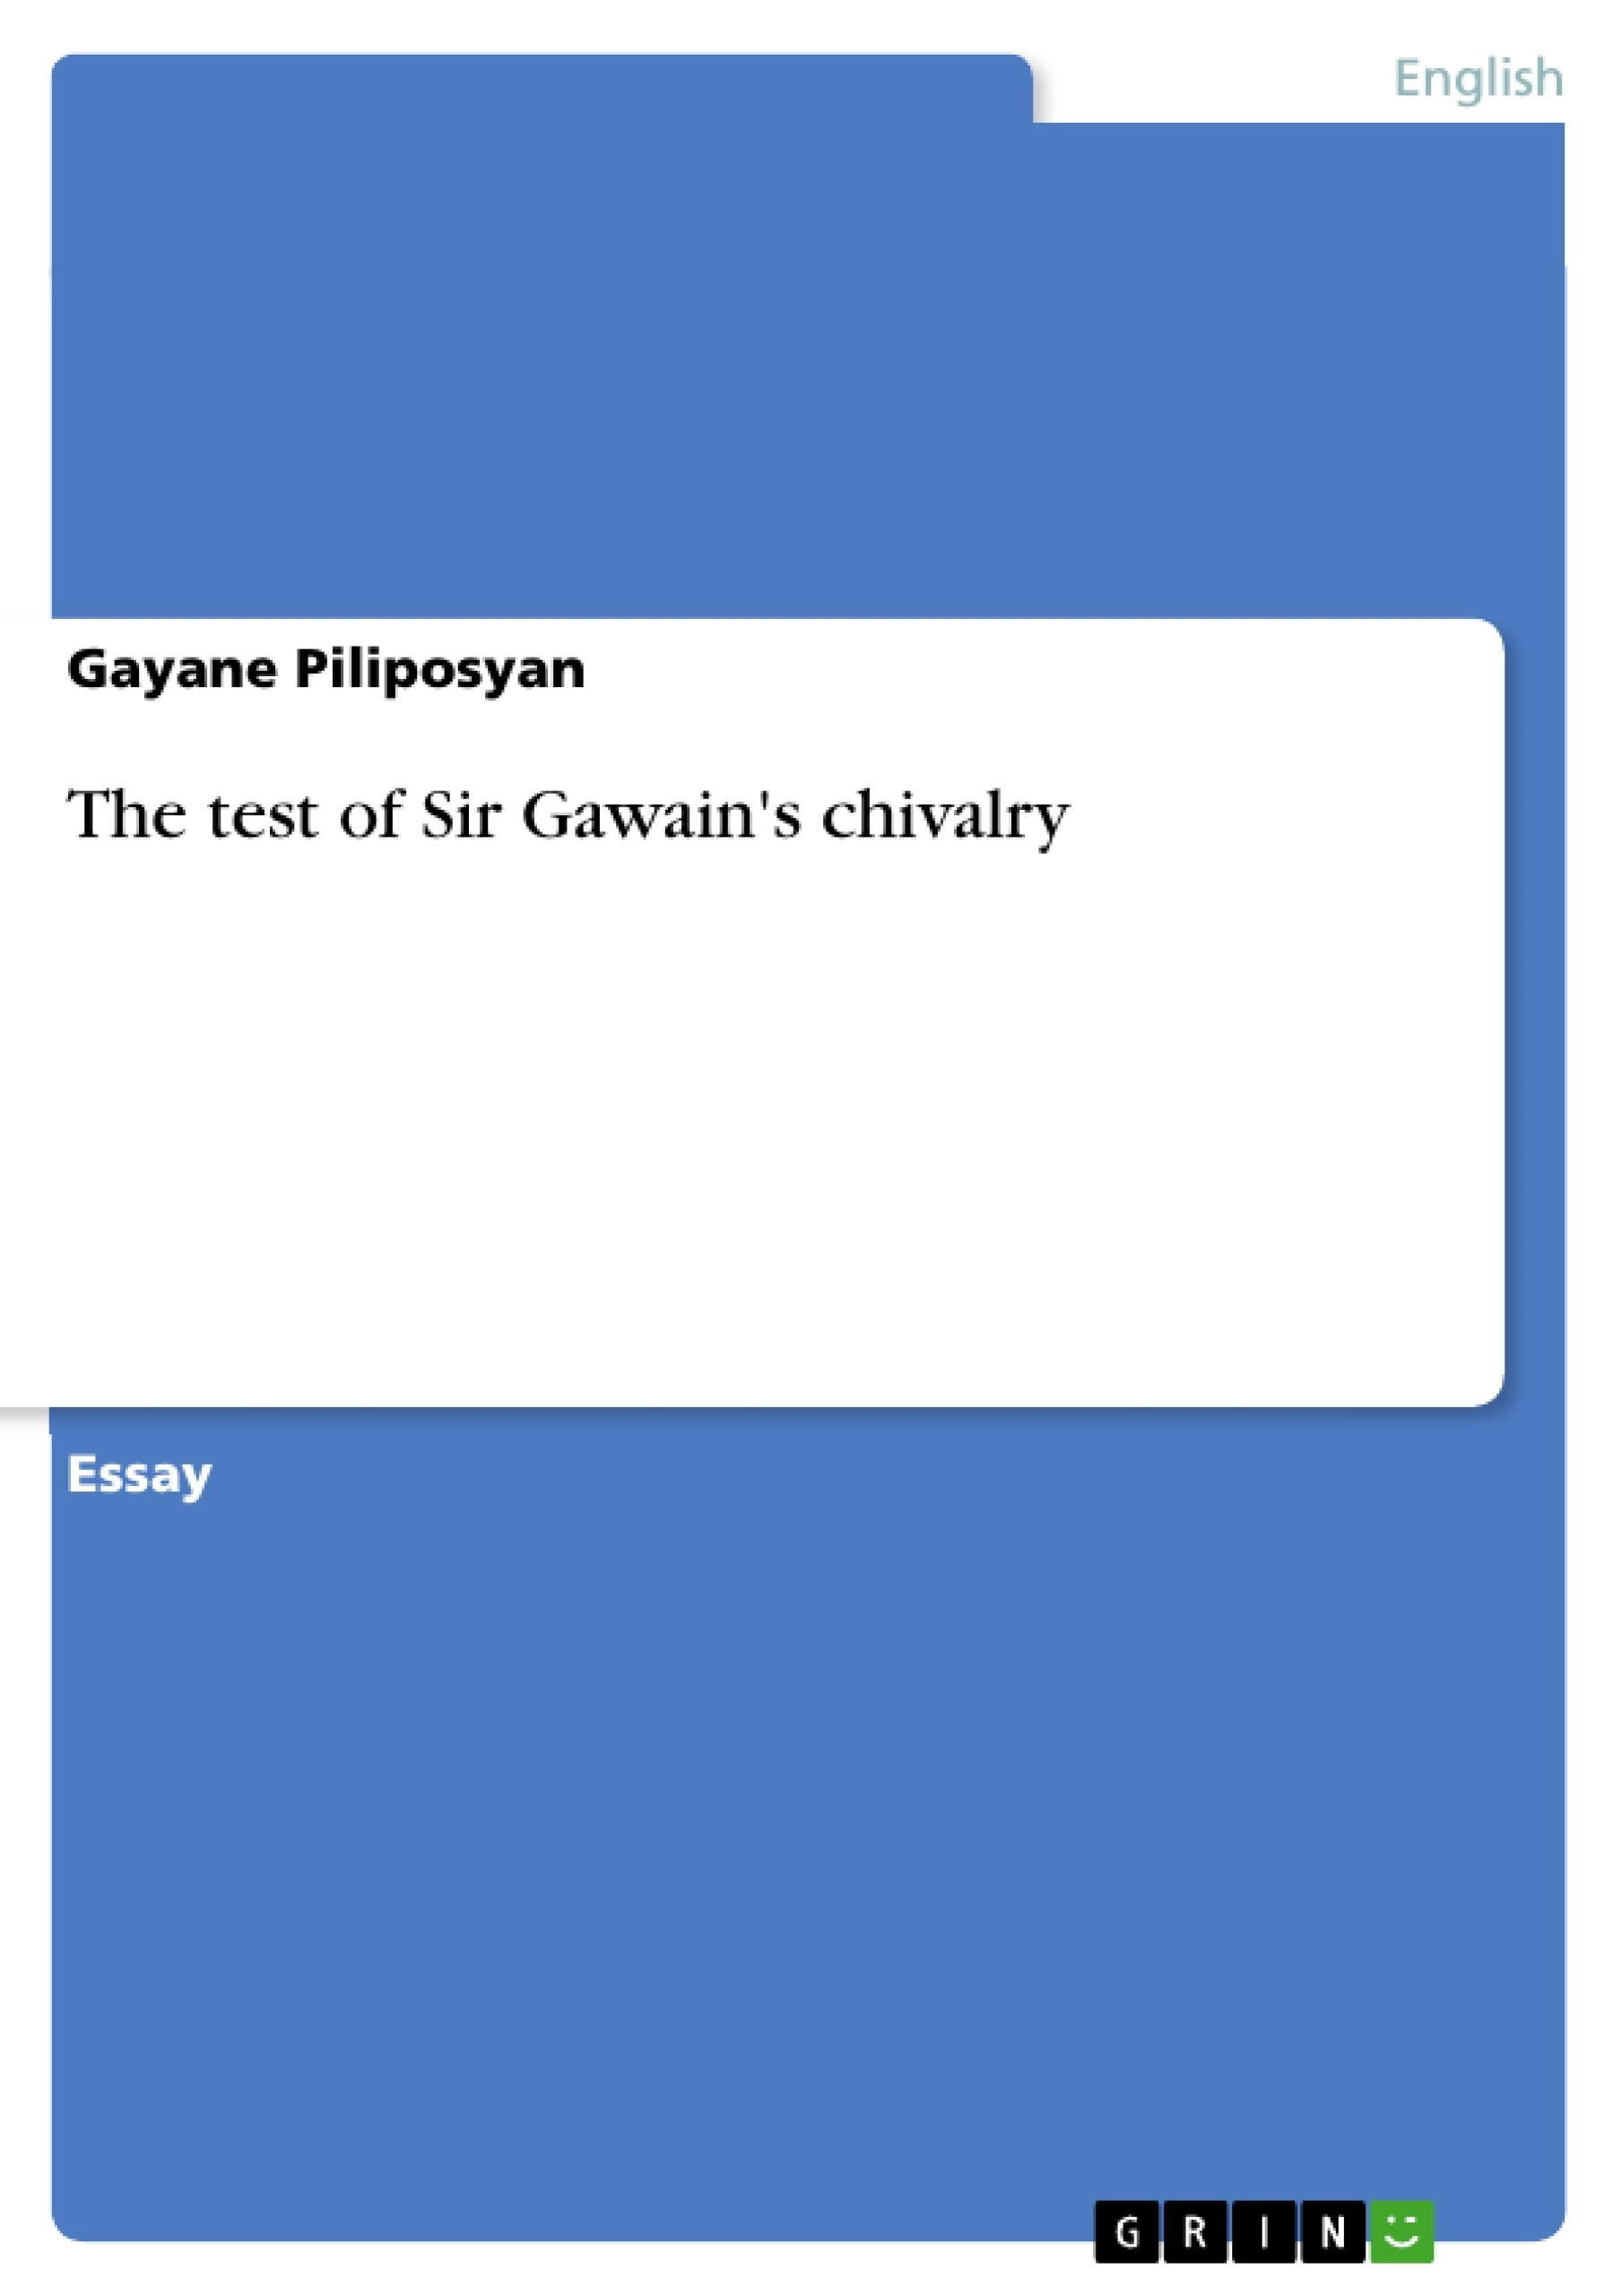 Title: The test of Sir Gawain's chivalry